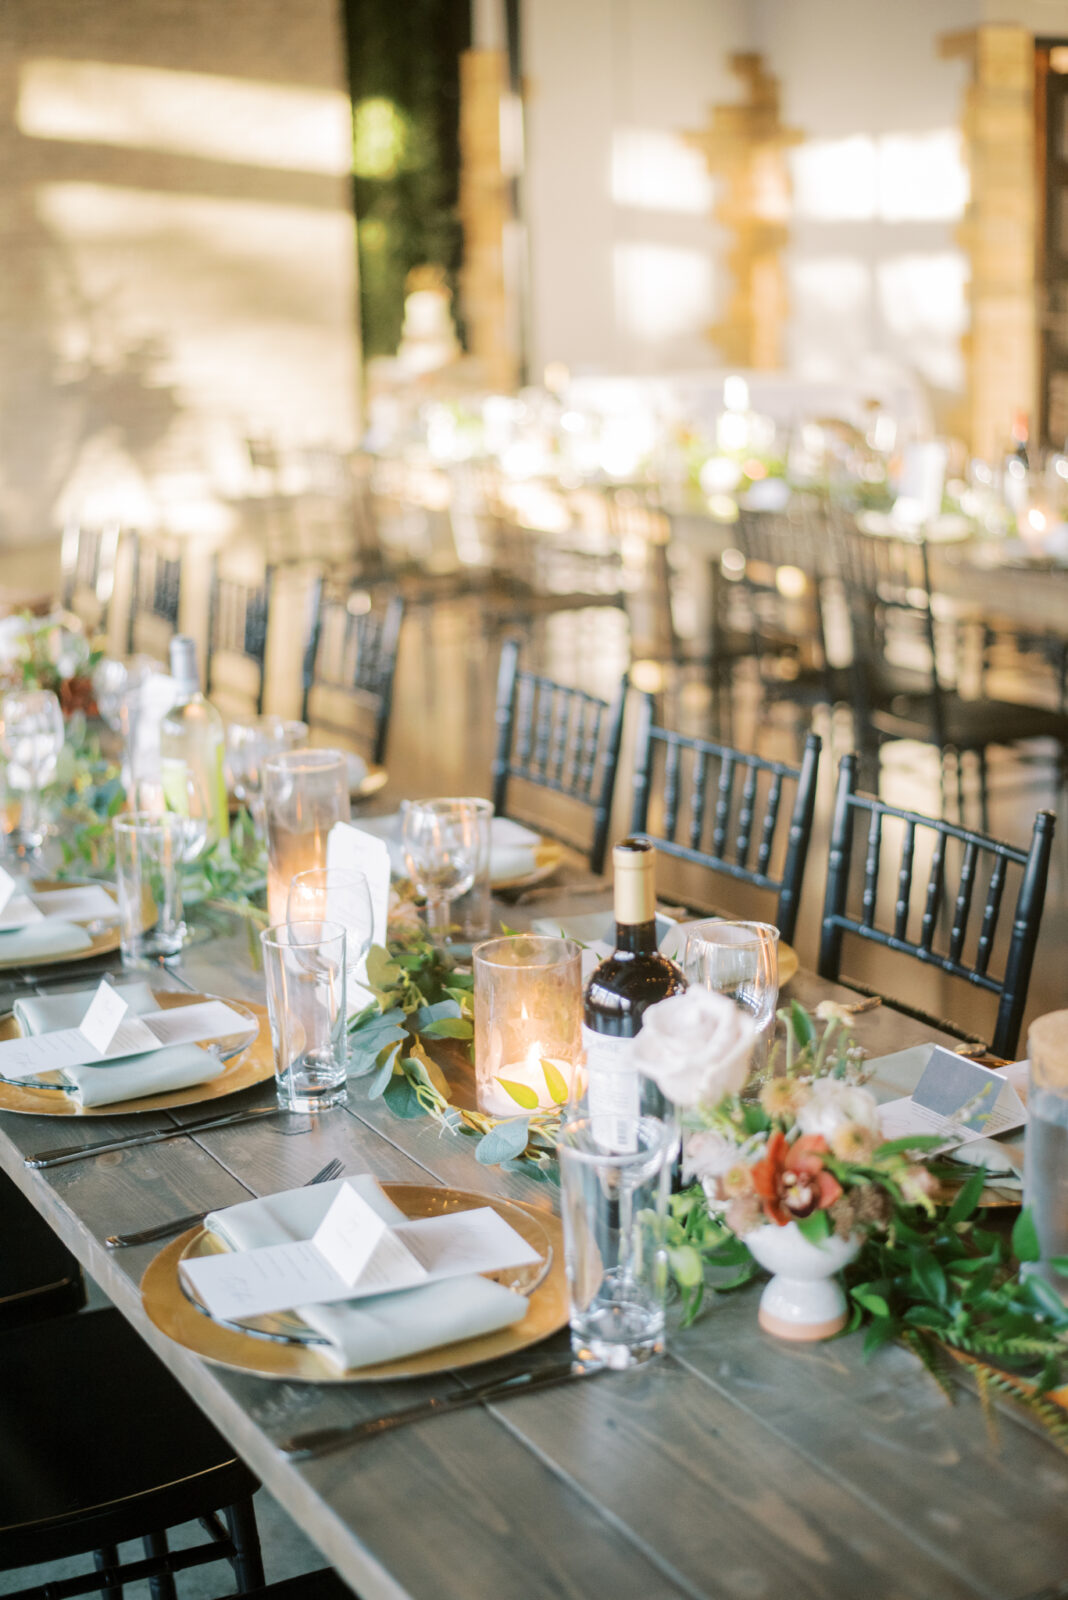 black chiavari chairs for guests during wedding modern wedding reception, fall wedding florals with lush greenery on guest tables, gold charger place settings on long wood tables rented from Tarnished Timber